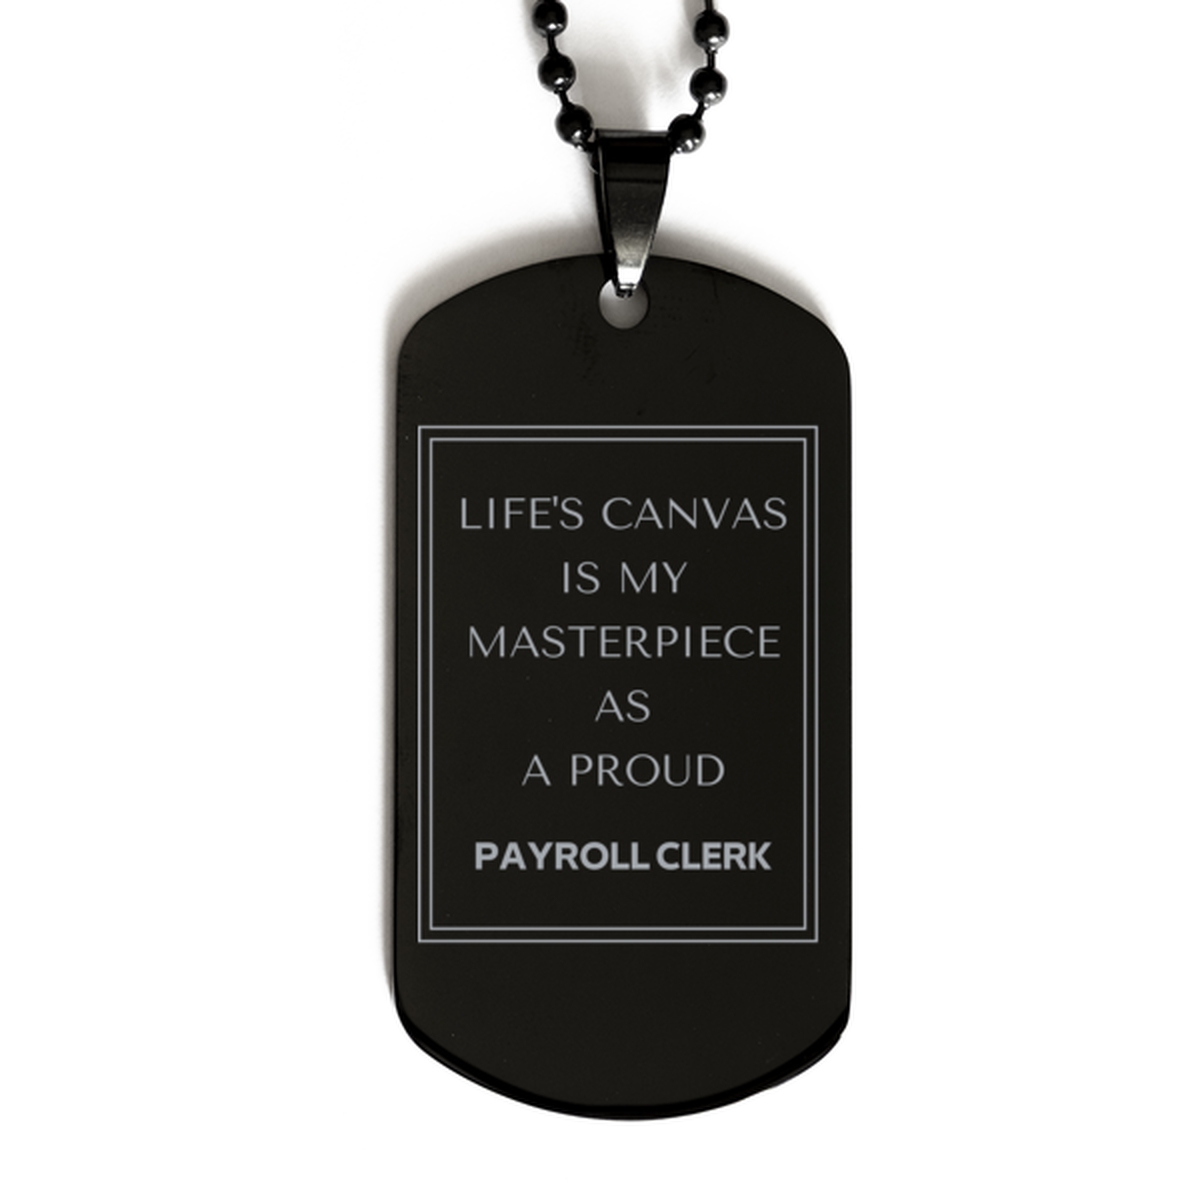 Proud Payroll Clerk Gifts, Life's canvas is my masterpiece, Epic Birthday Christmas Unique Black Dog Tag For Payroll Clerk, Coworkers, Men, Women, Friends